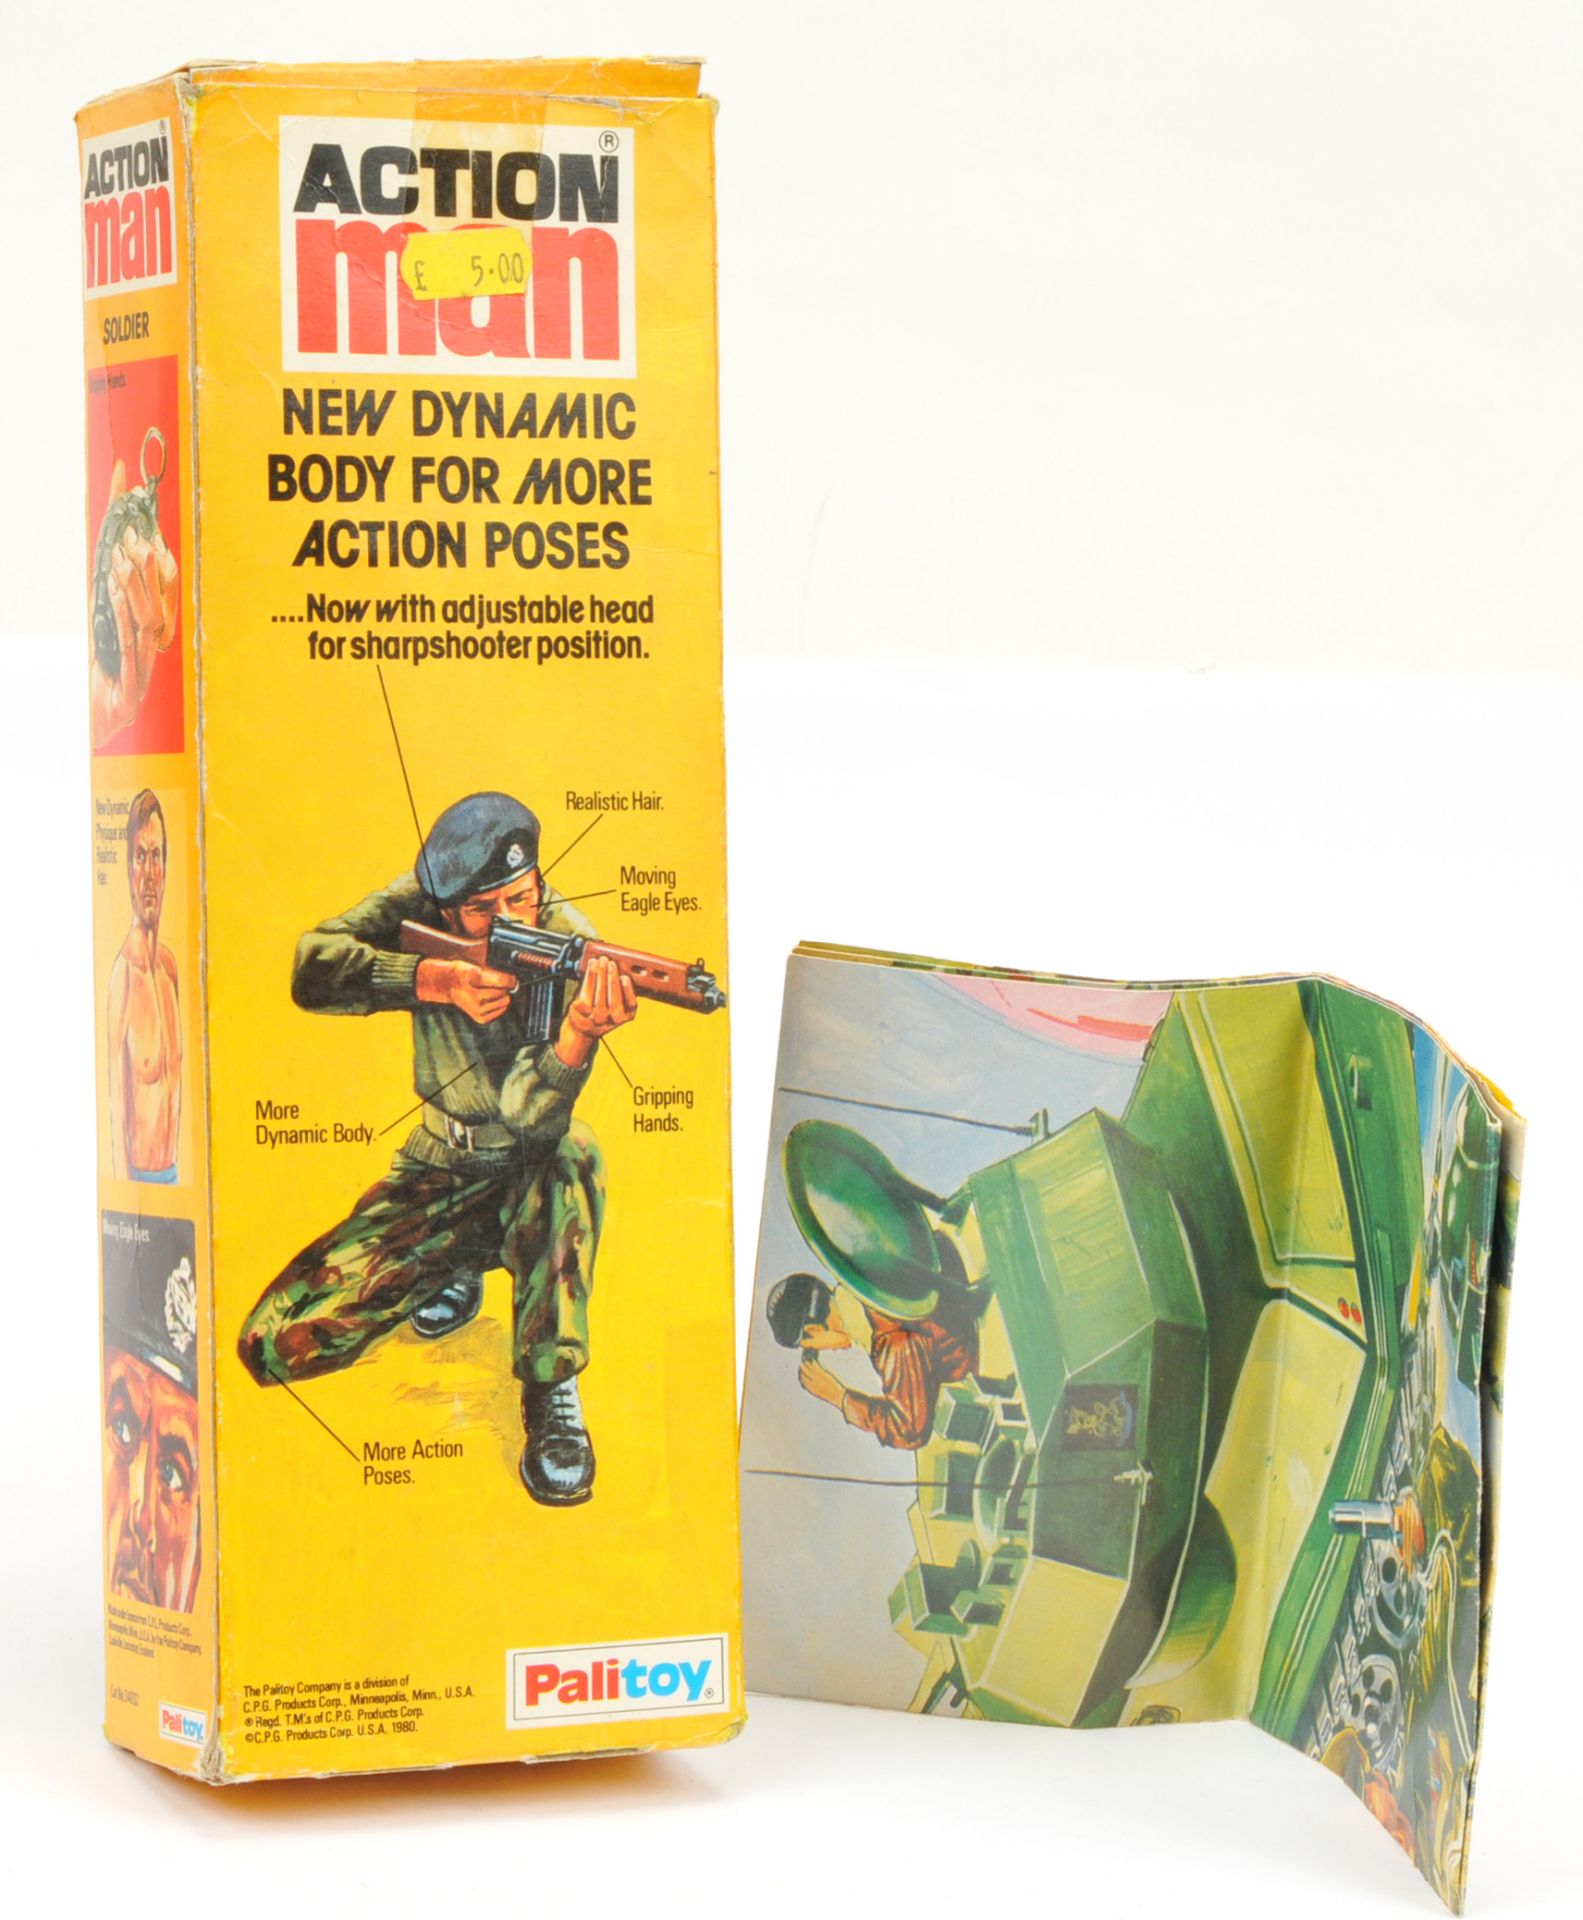 Palitoy Action Man EMPTY Soldier box. Condition is Fair Plus. - Image 2 of 2